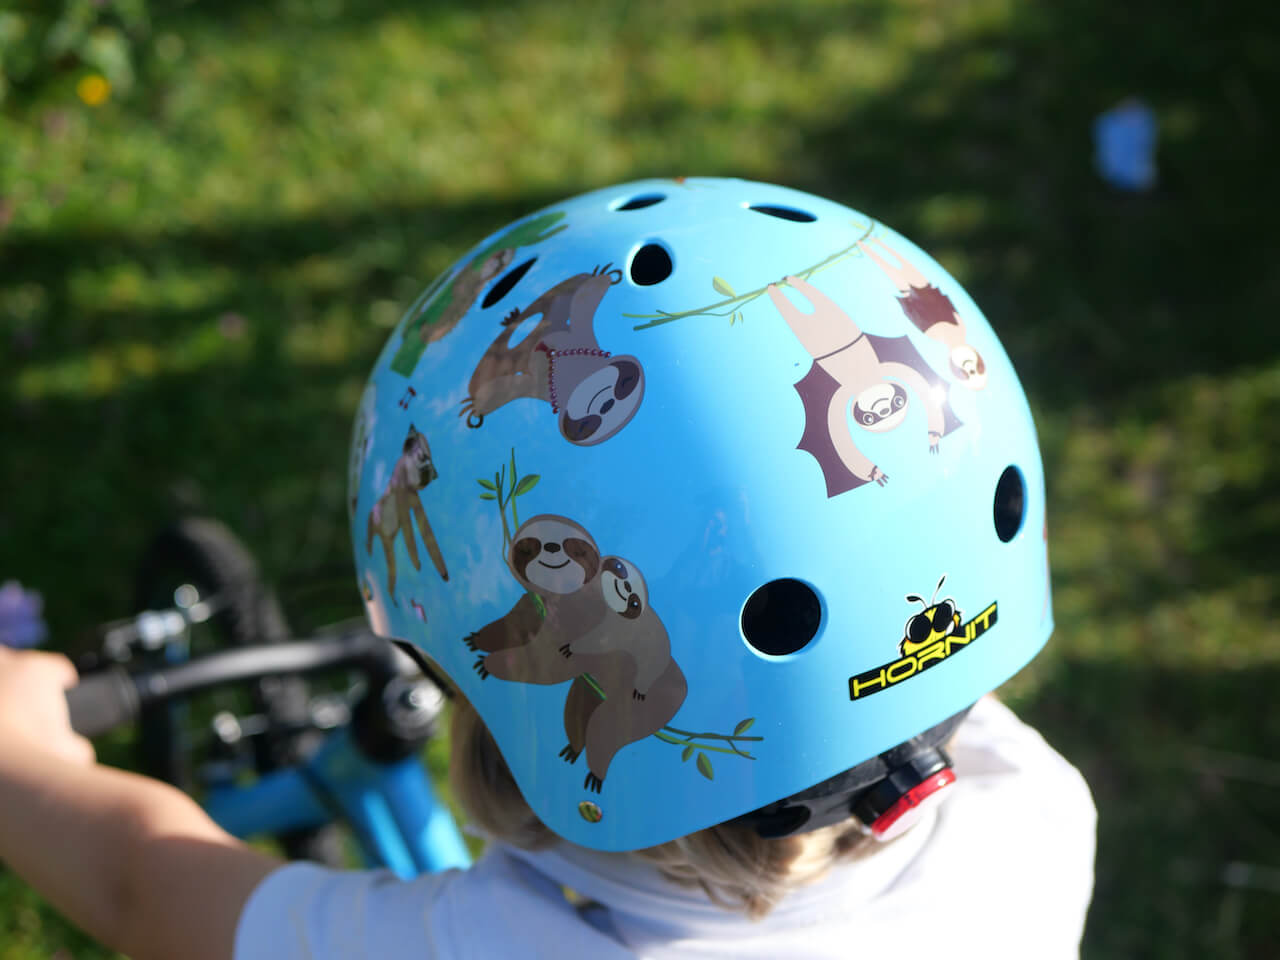 A child's helmet with cartoon sloths printed on it, modelled by a toddler, as seen from behind